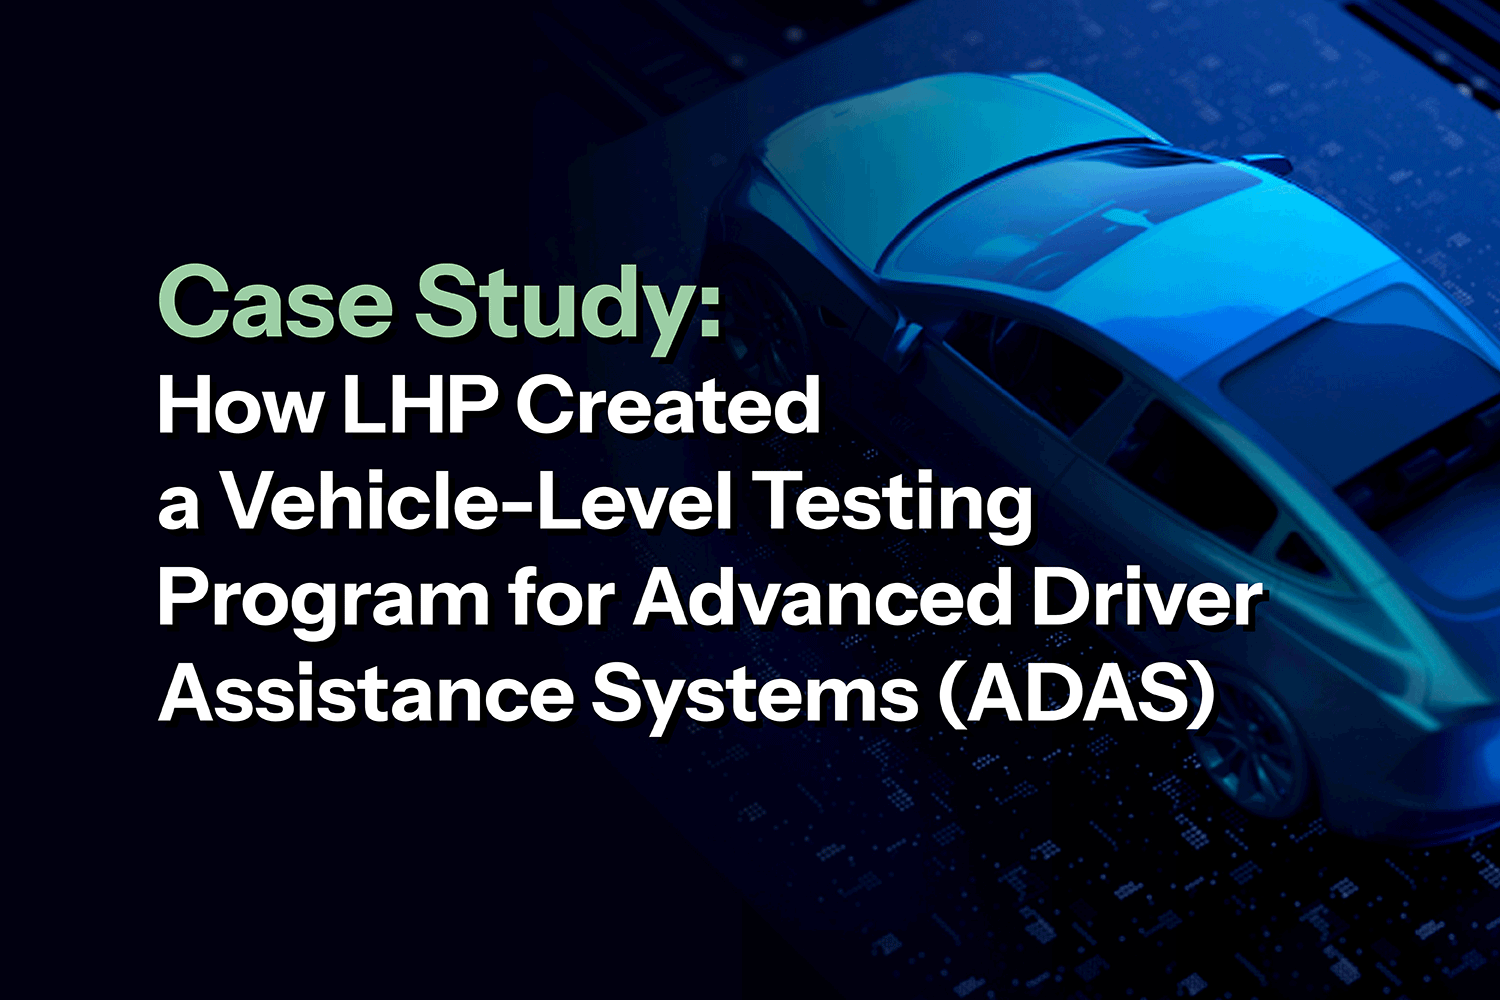 LSS-Knowledge-Center-Case-Study-How LHP Created a Vehicle-Level-Card-Images-01